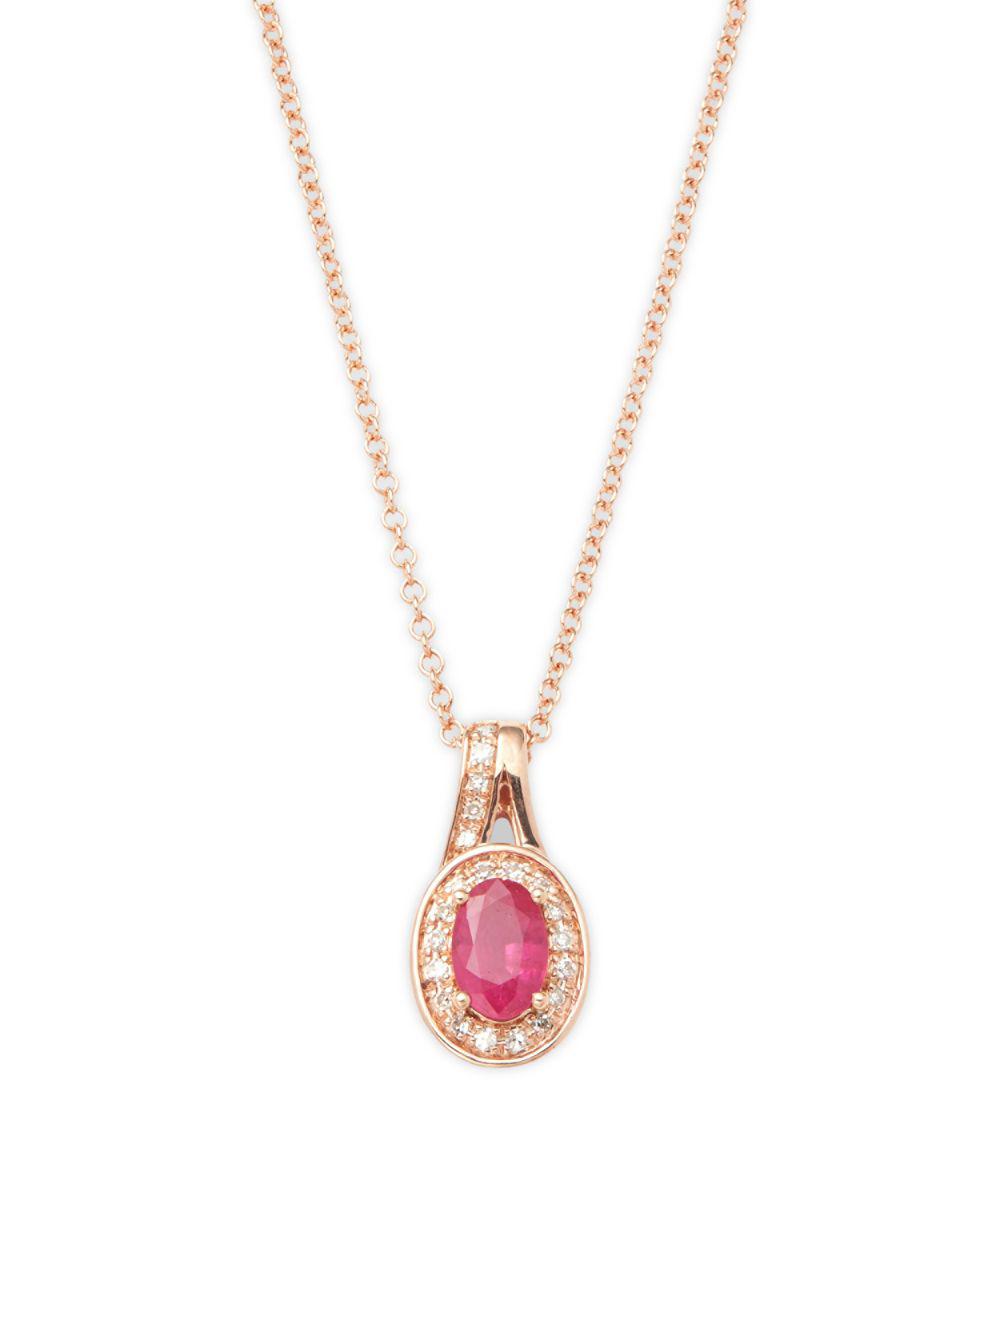 Effy 14k Rose Gold, Diamond & Ruby Pendant Necklace in Pink - Lyst